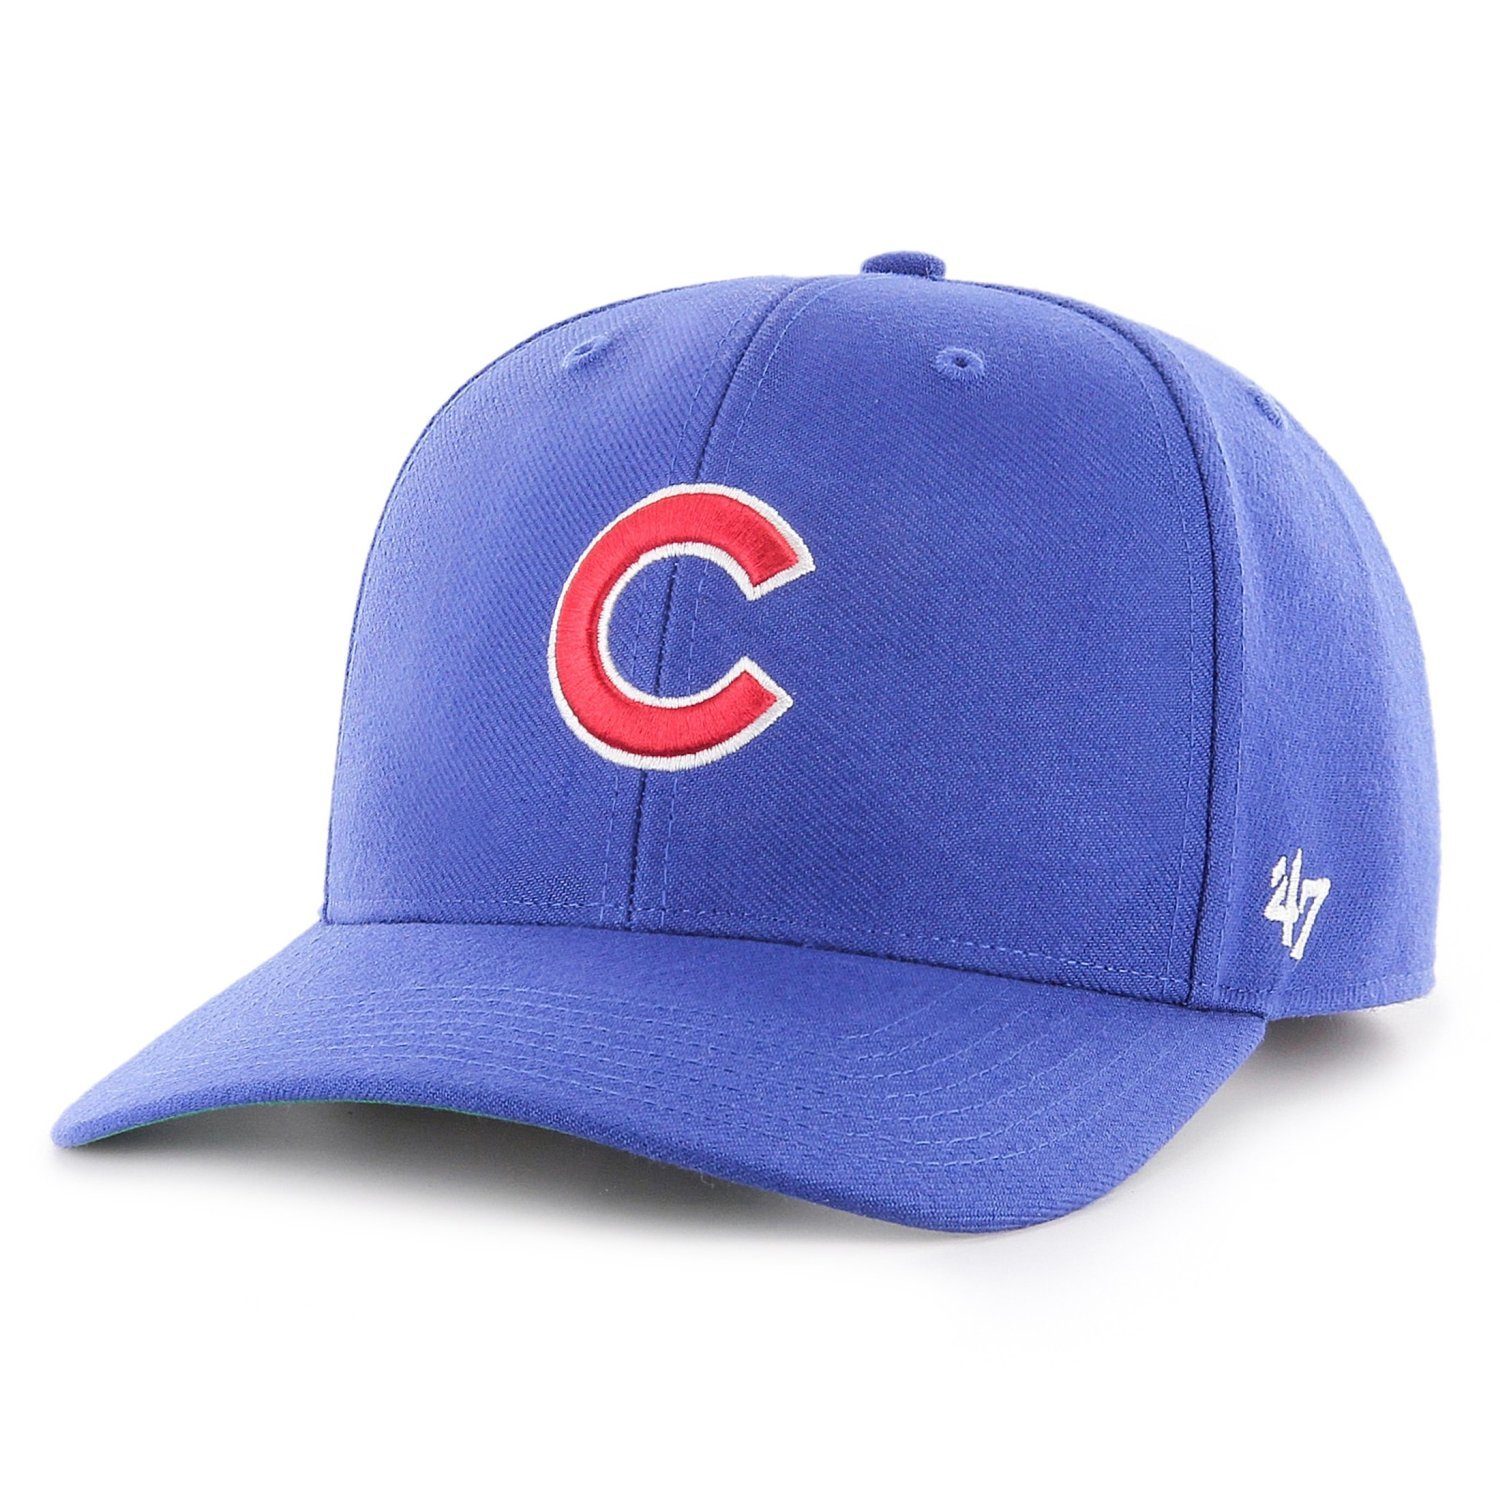 '47 Brand Snapback Cap Low Profile ZONE Chicago Cubs